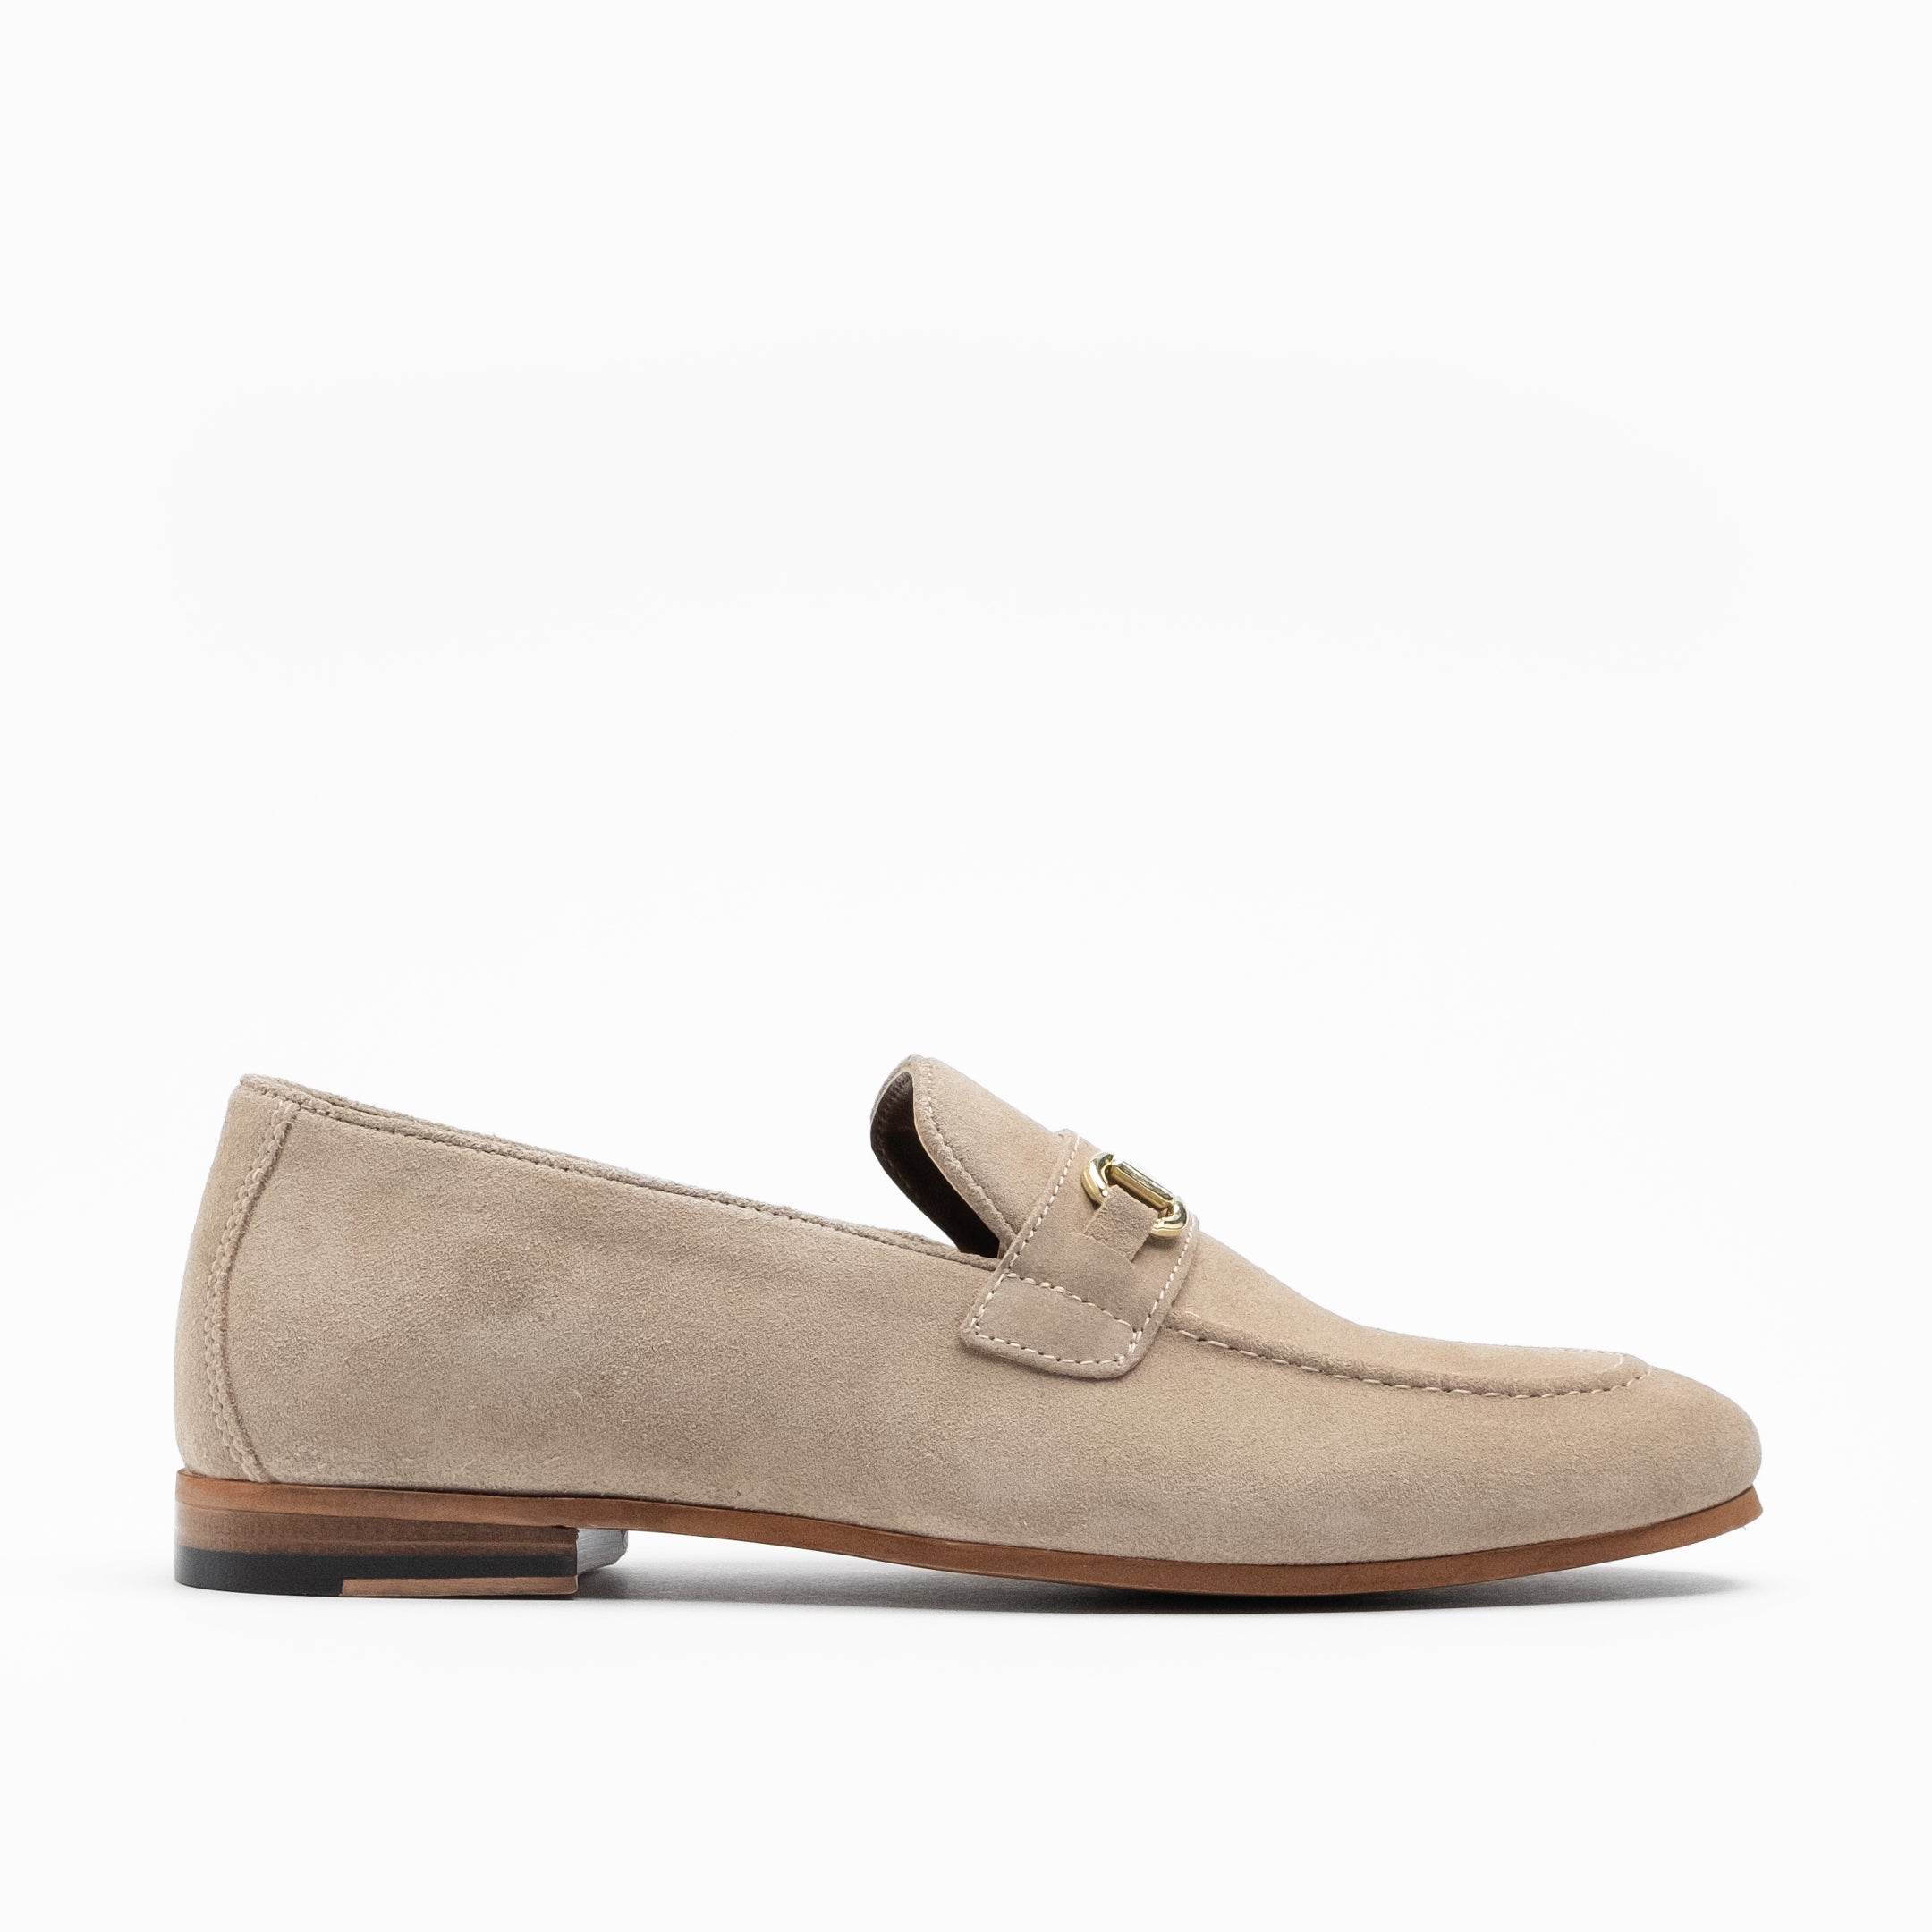 WALK London Terry Trim Loafer Stone Suede